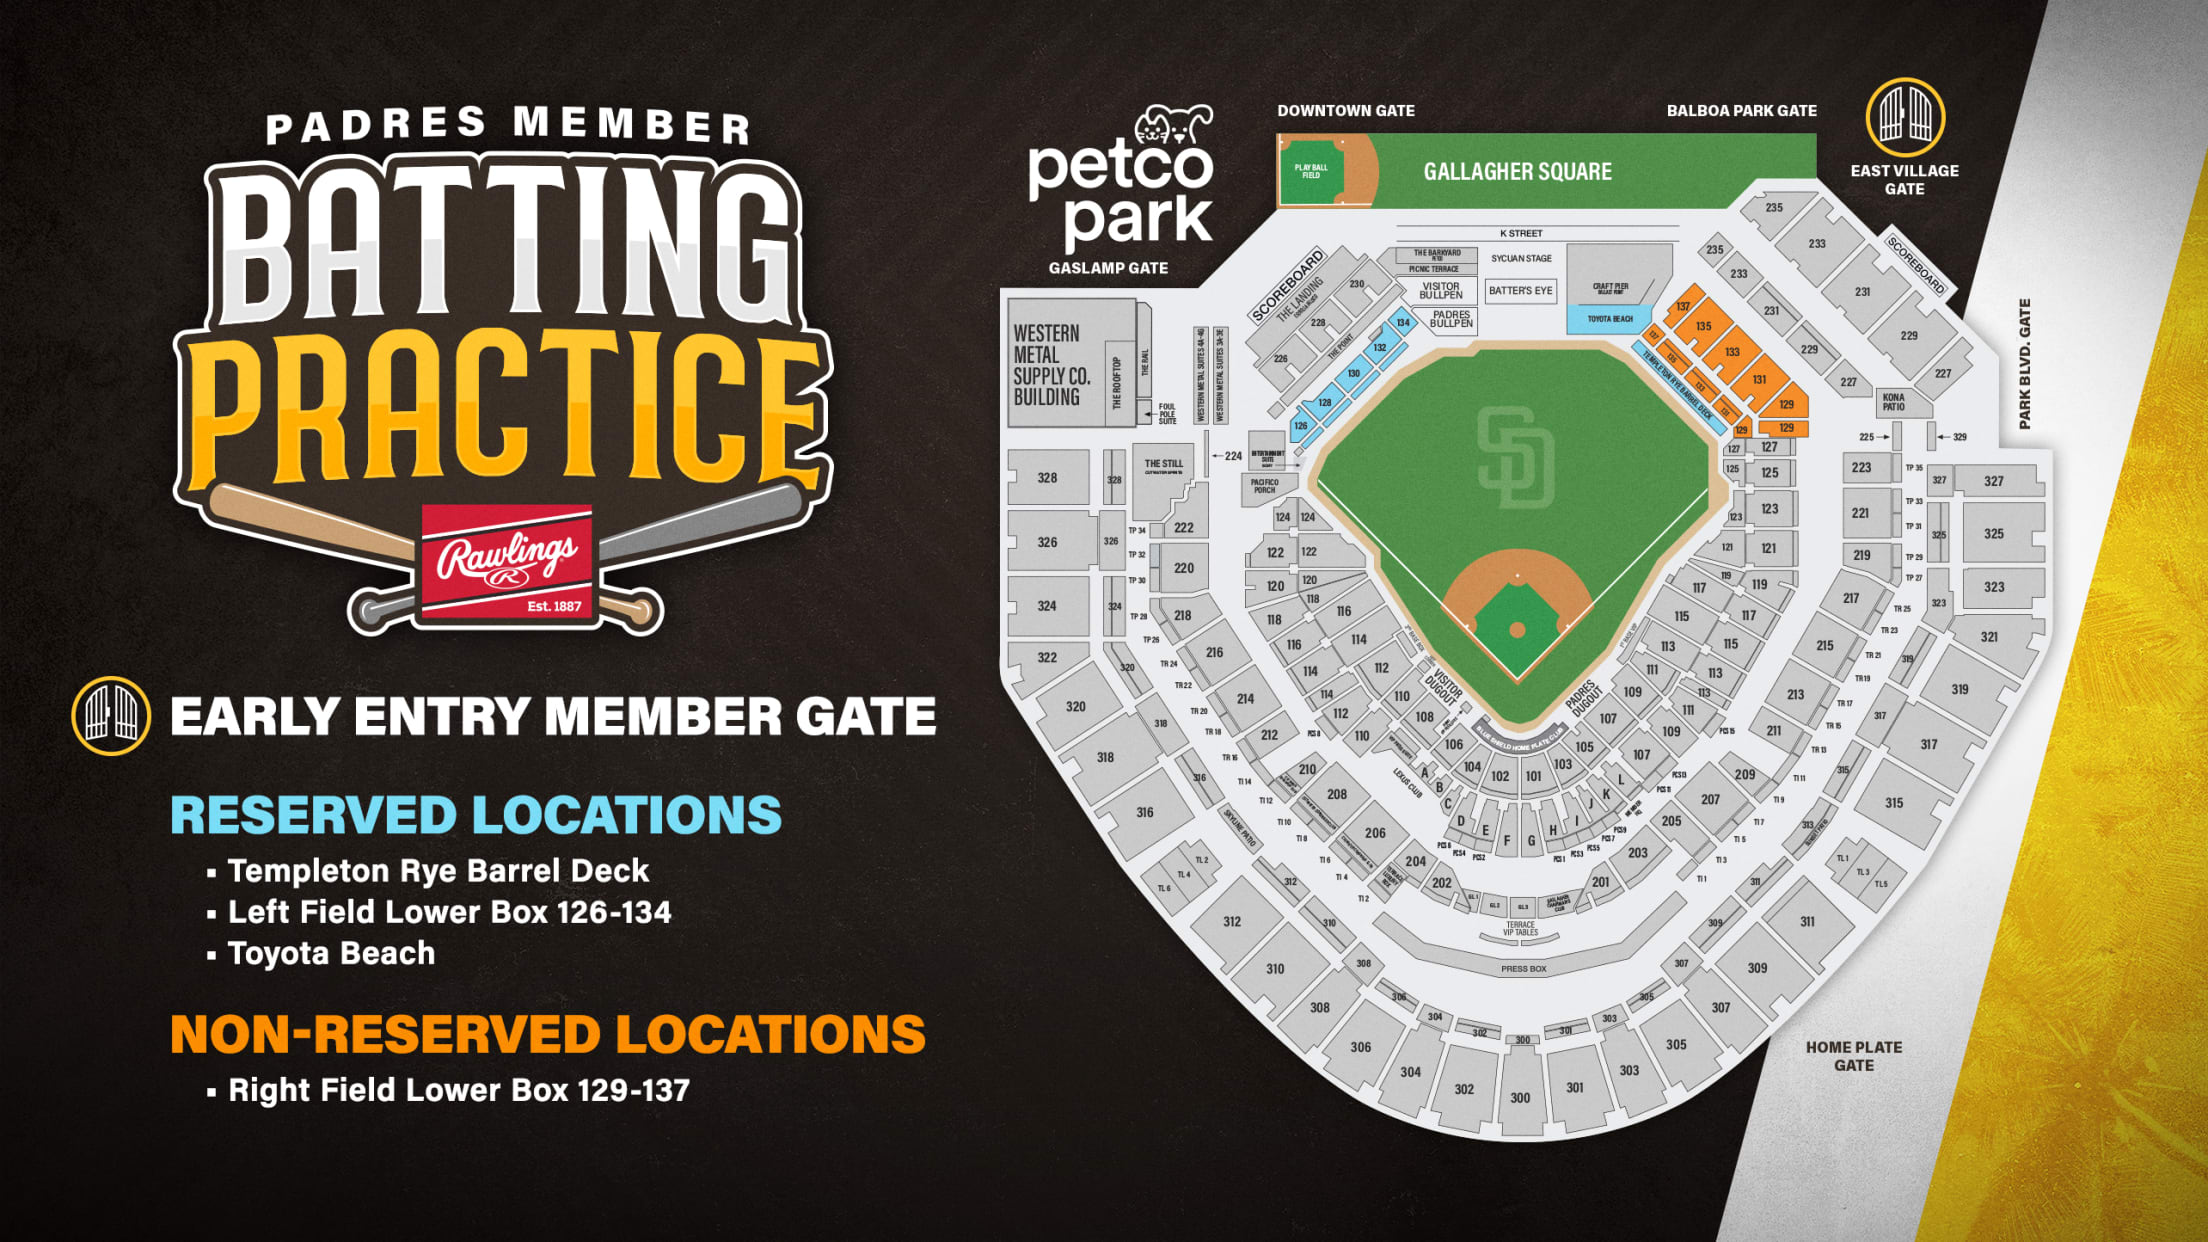 San Diego Padres Batting Practice - Mickey's Place